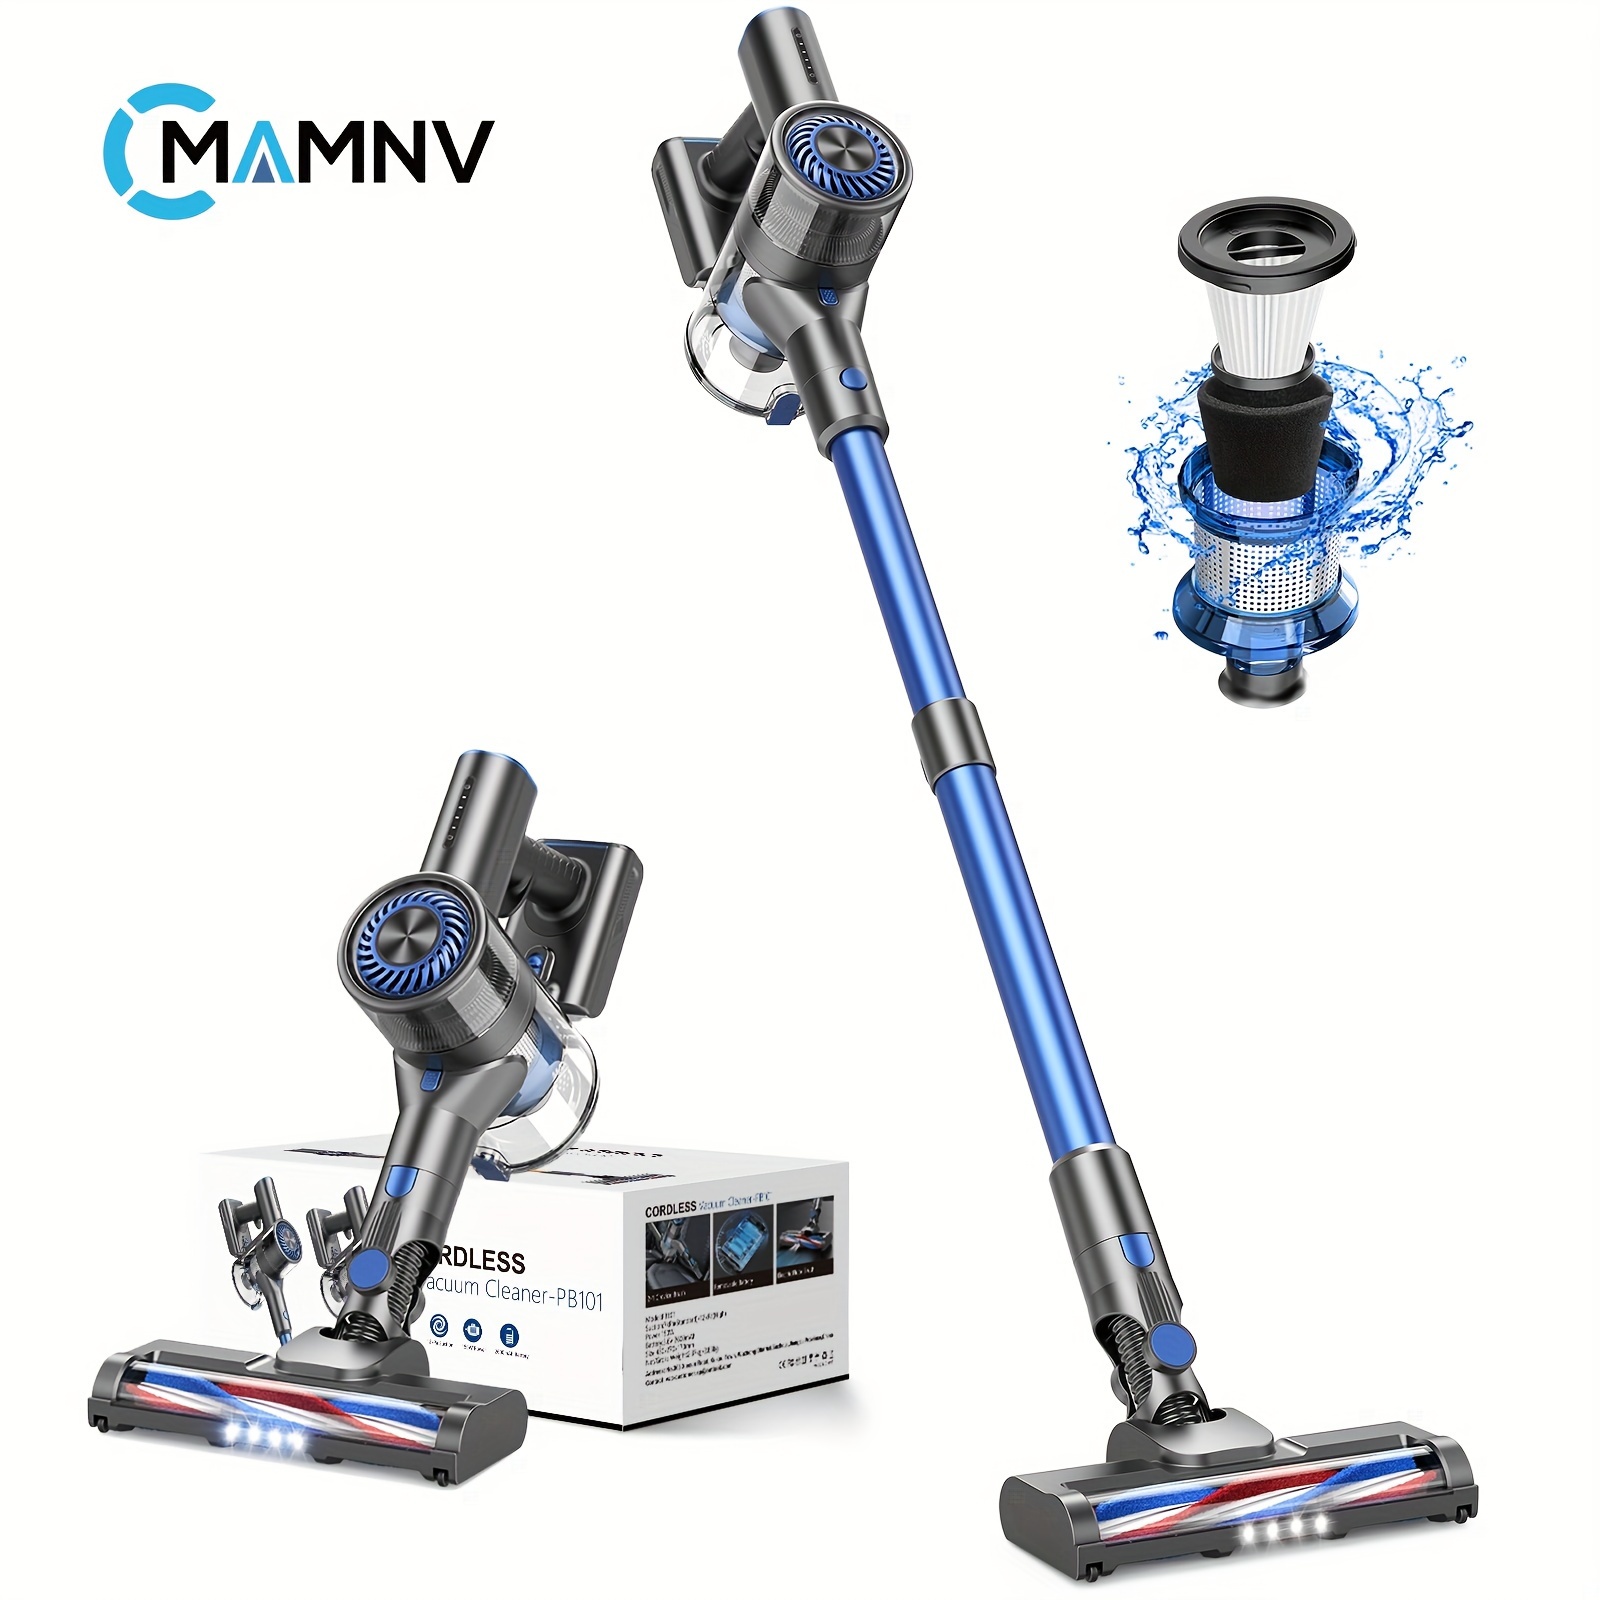 

Mamnv Cordless Vacuum Cleaner Rechargeable With 2600mah Detachable Battery, 12000pa Cyclone Vacuum With Hepa Filter, Lightweight Portable Handheld Stick Vacuum For Hard Floor Car Cleaning